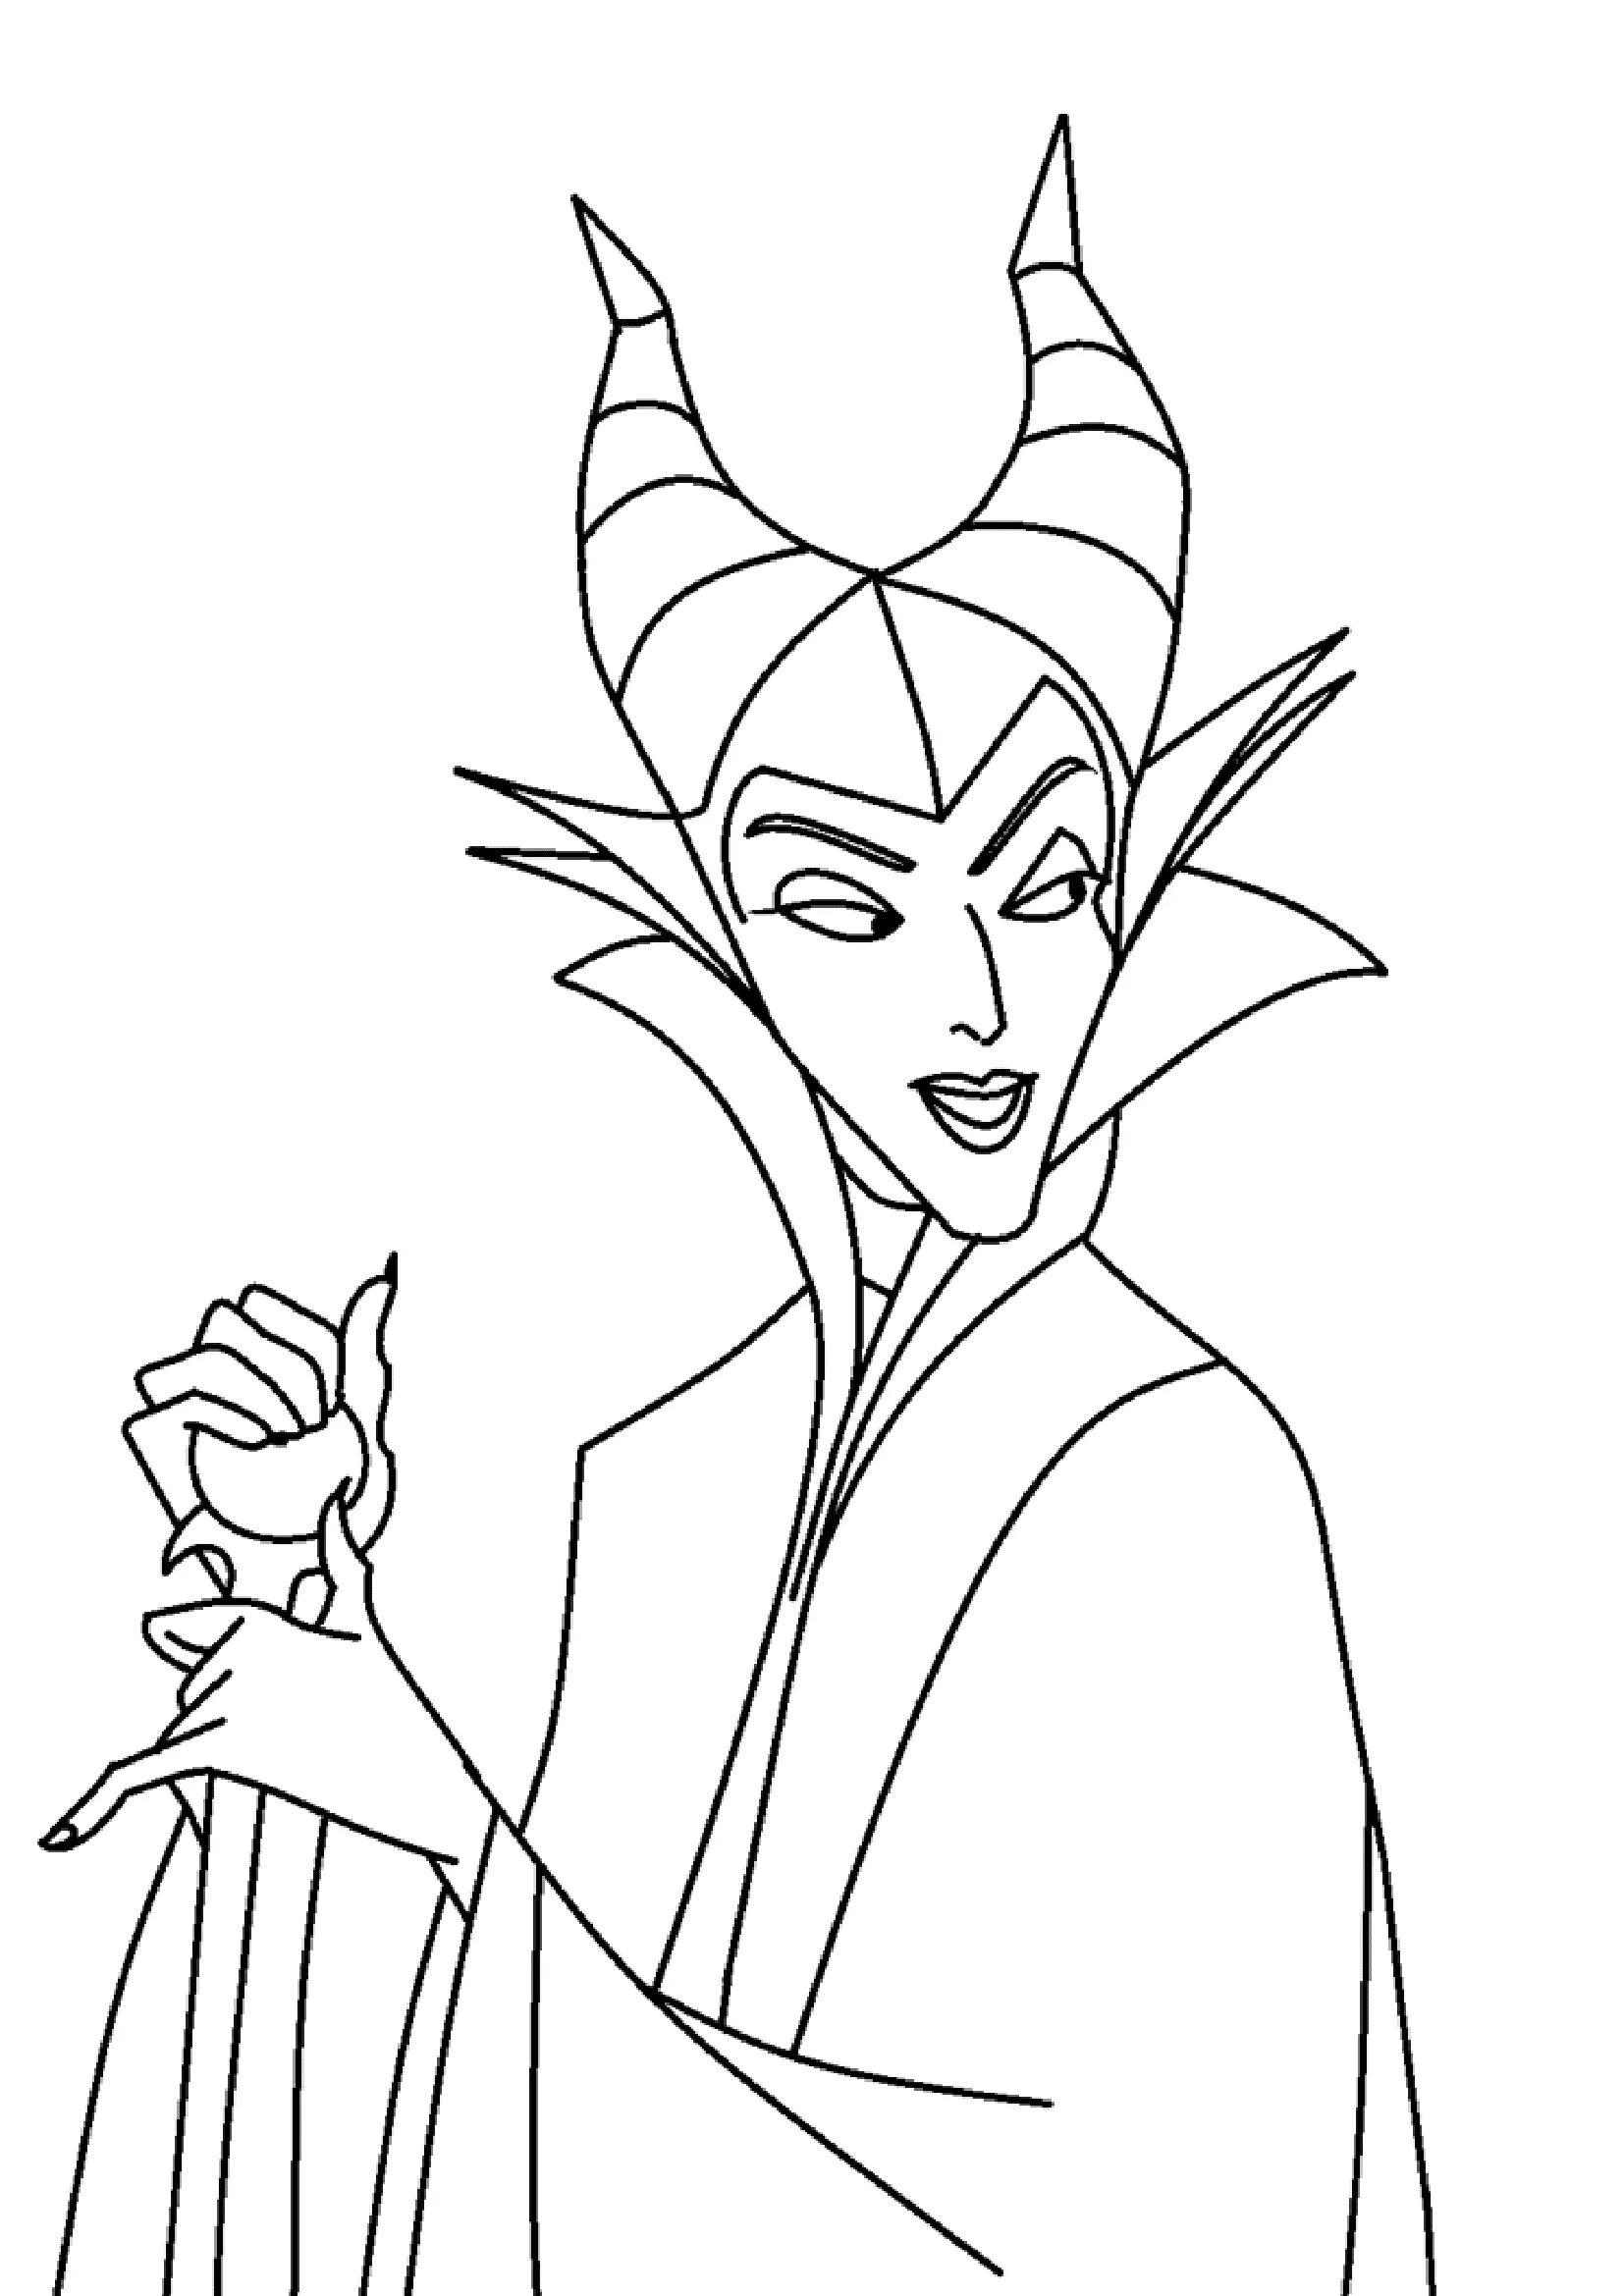 Maleficent for kids #1